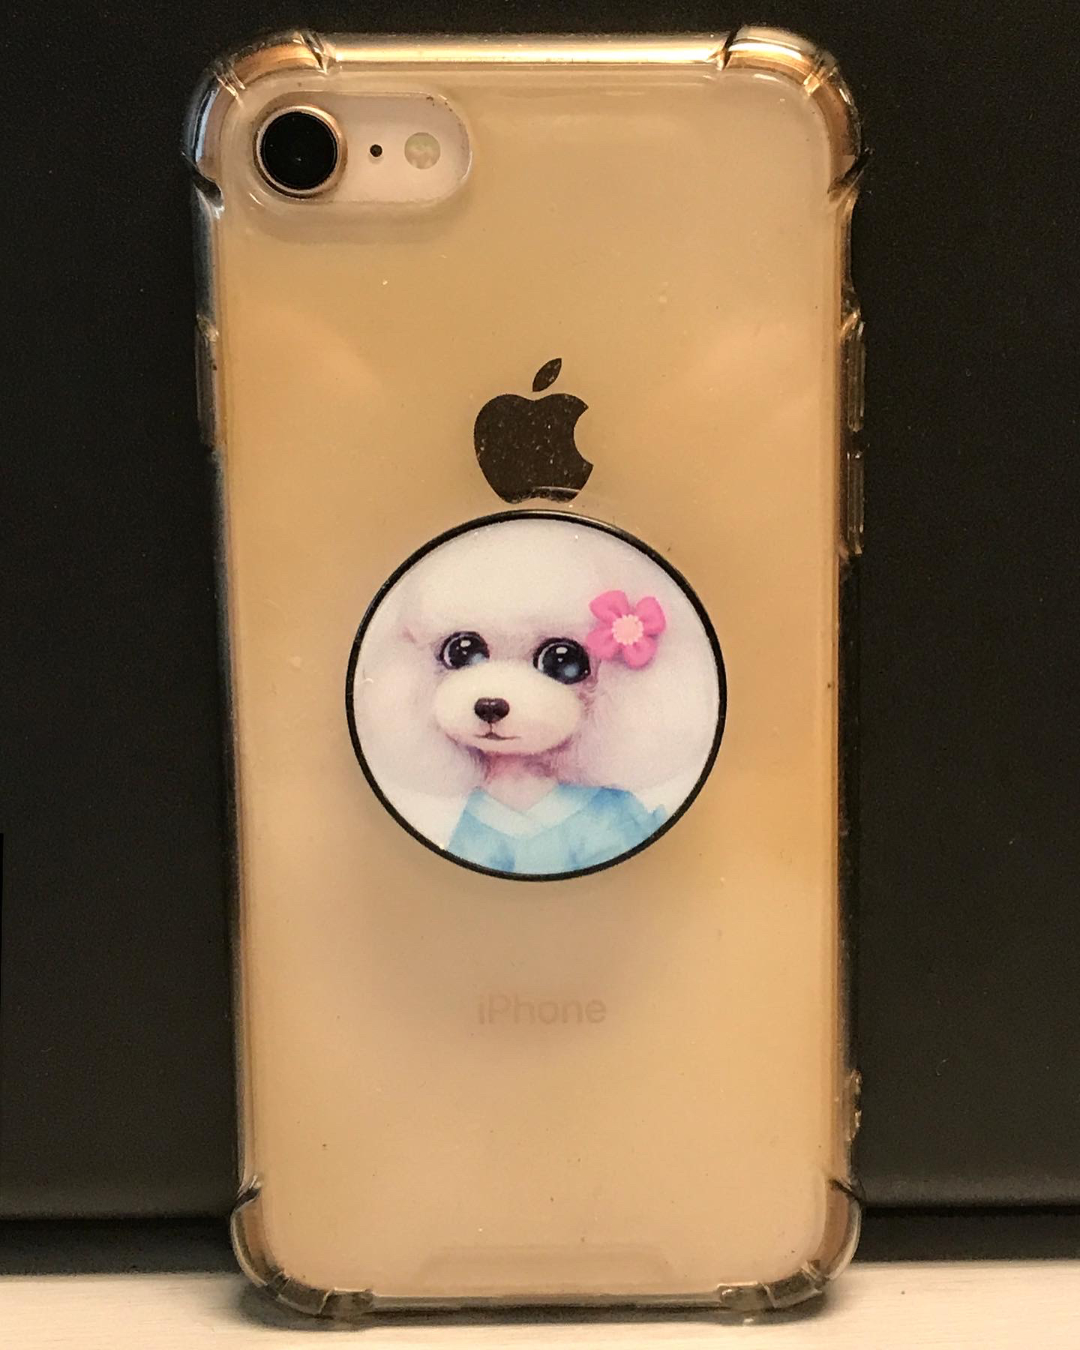 Muffy the Popsocket on a rose gold iphone in a clear plastic case